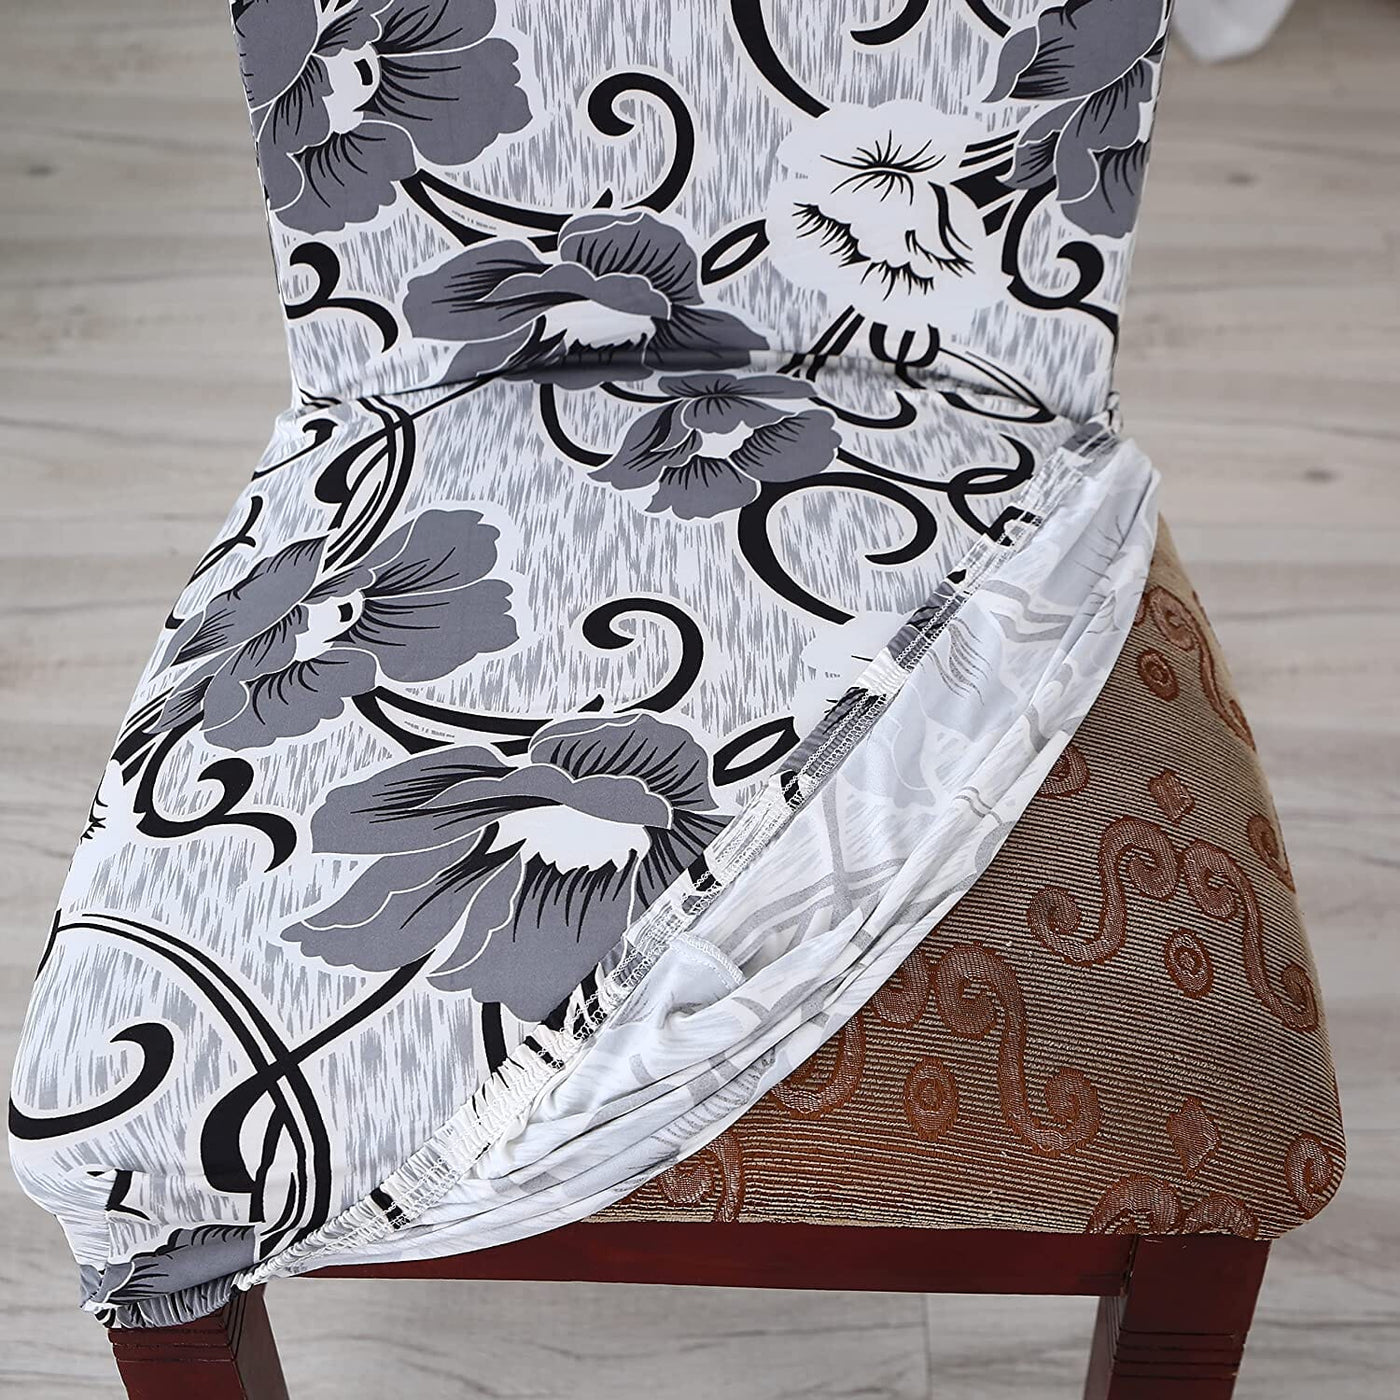 White Grey Flower Premium Chair Cover - Stretchable & Elastic Fitted Great Happy IN 